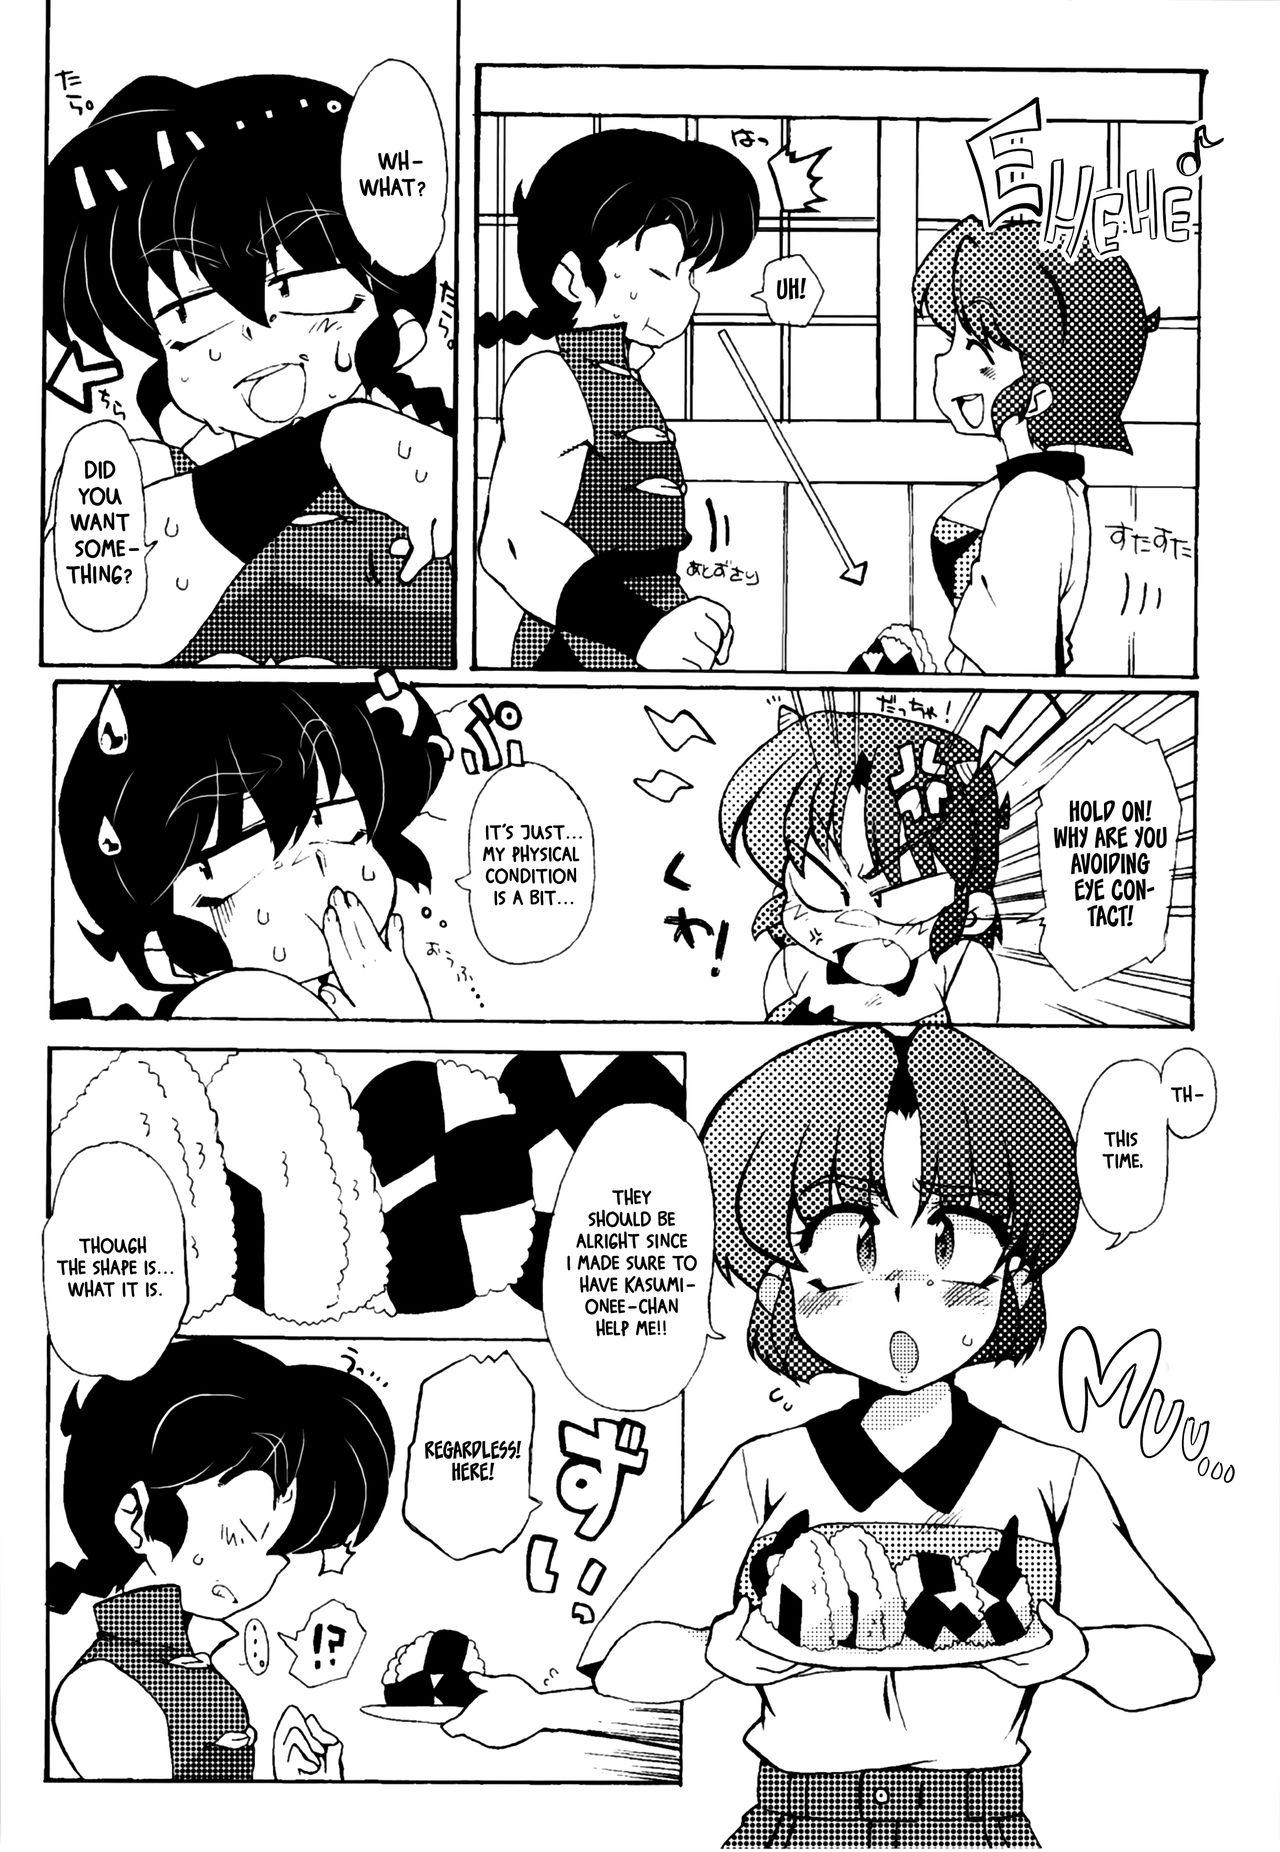 Smooth Kyou wa Kao ga Mirenai ze | I can't see your face today - Ranma 12 Licking Pussy - Page 8